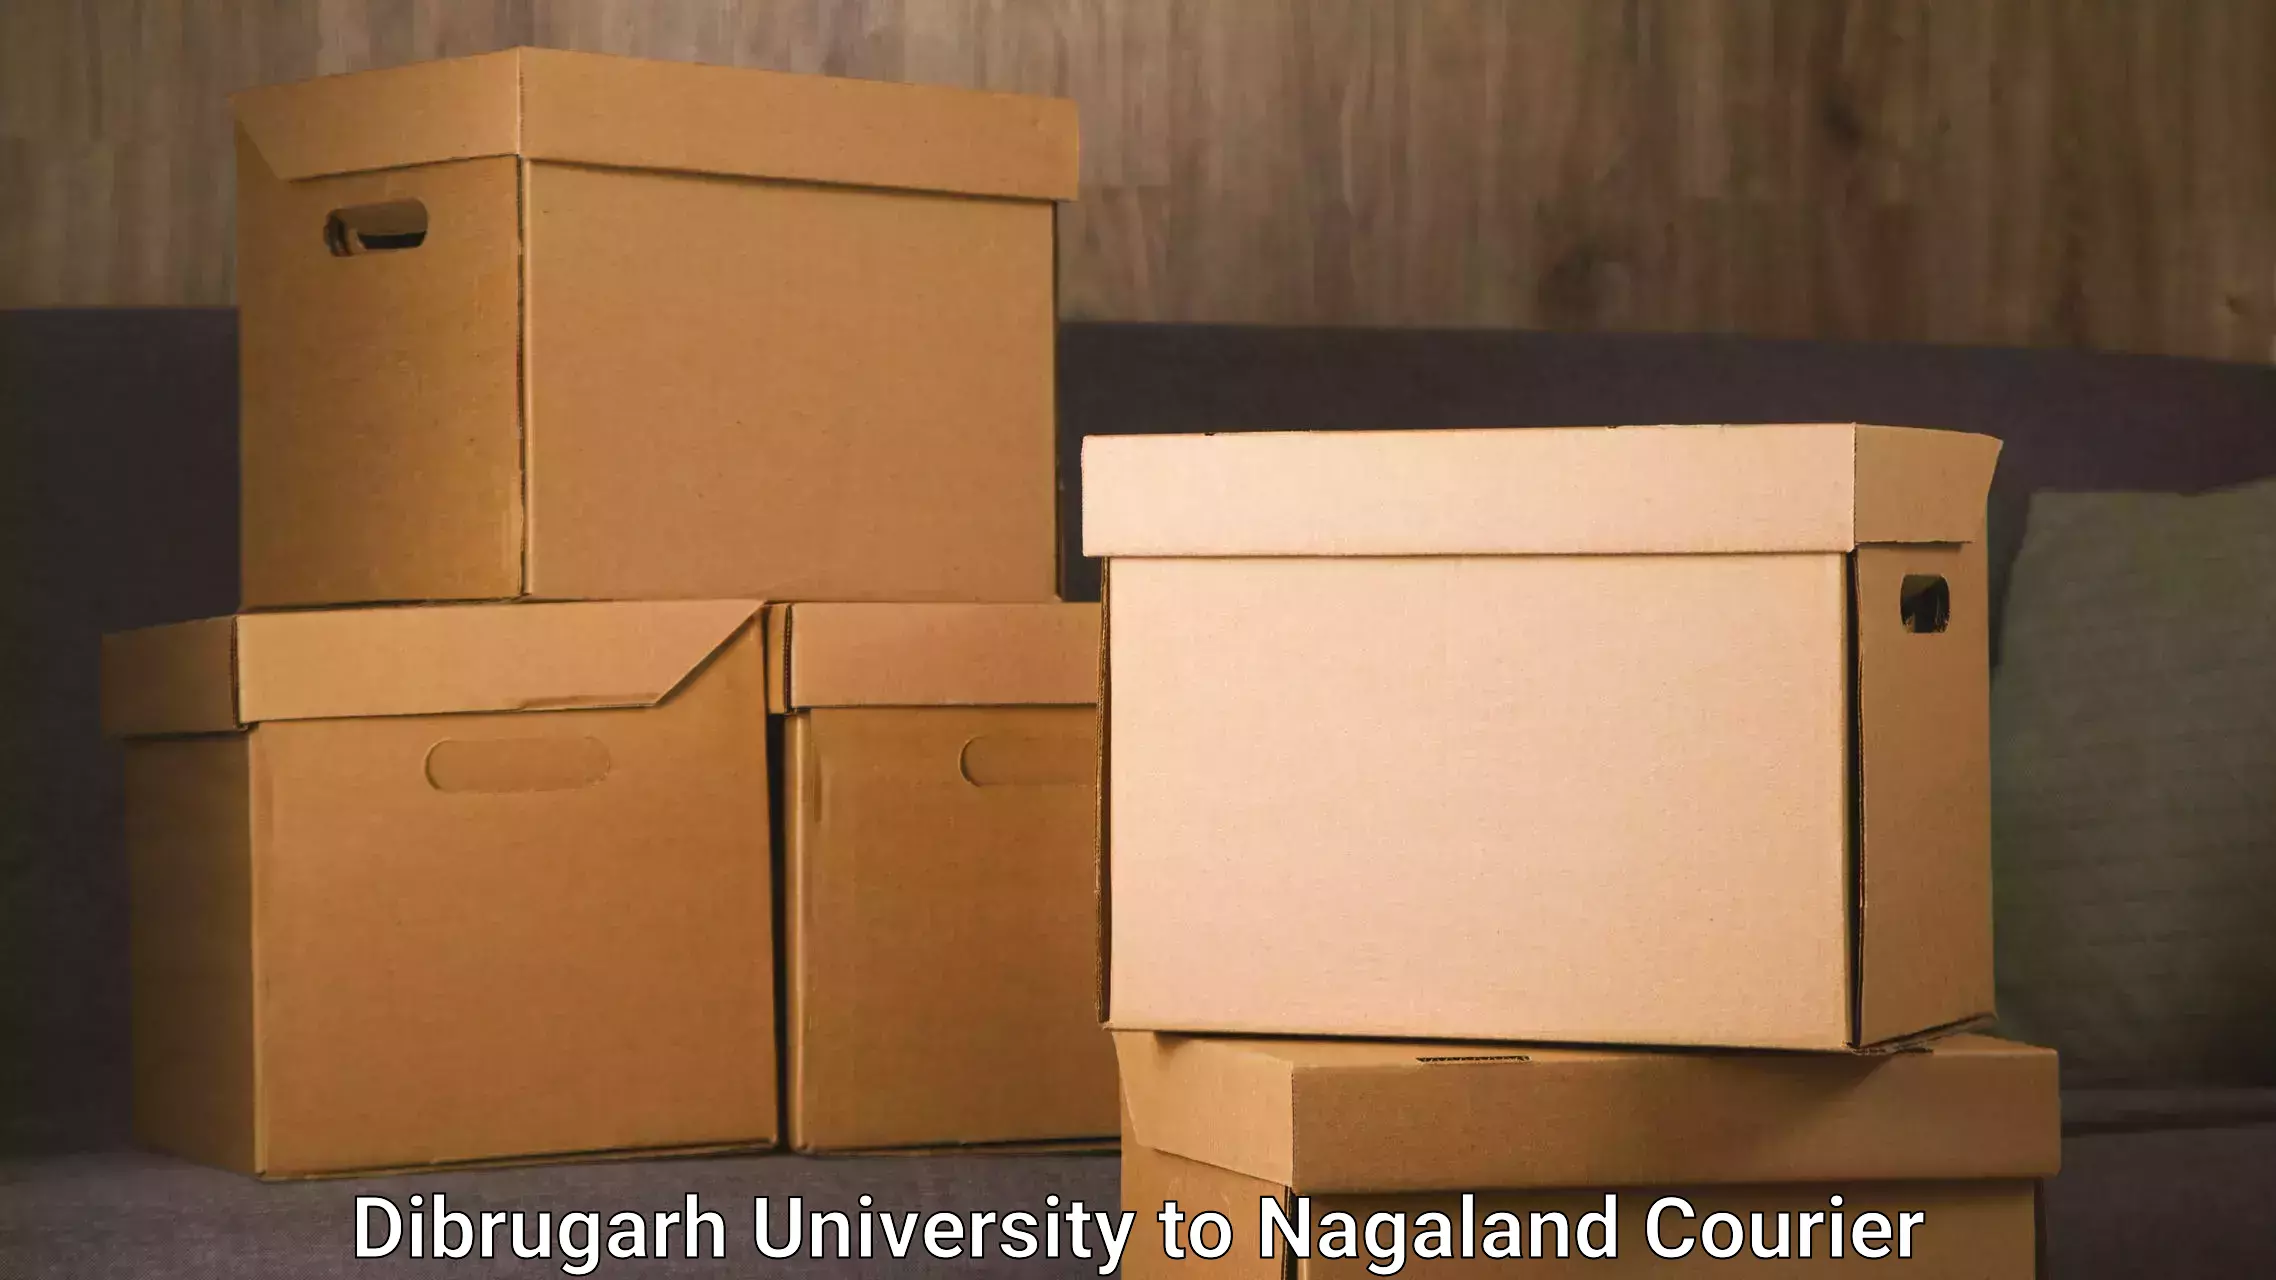 Express delivery solutions Dibrugarh University to Mon